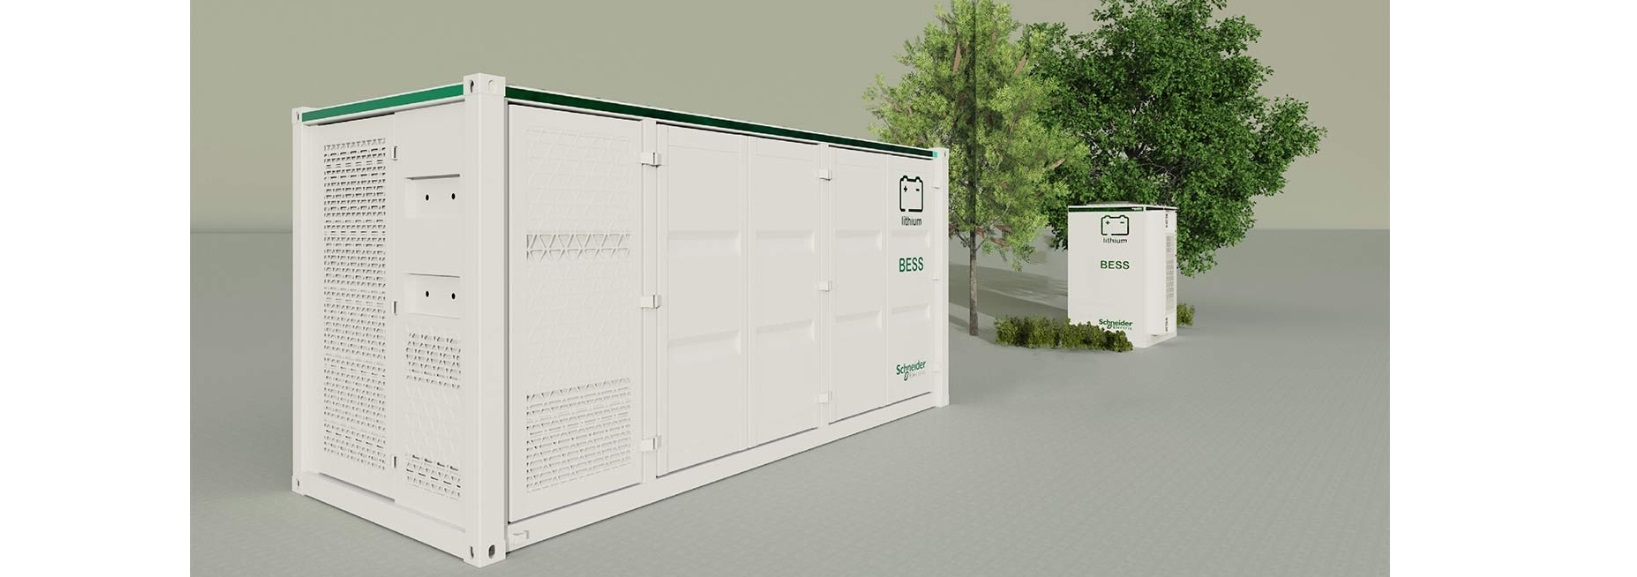 Schneider Electric unveils BESS for integrated microgrid solution